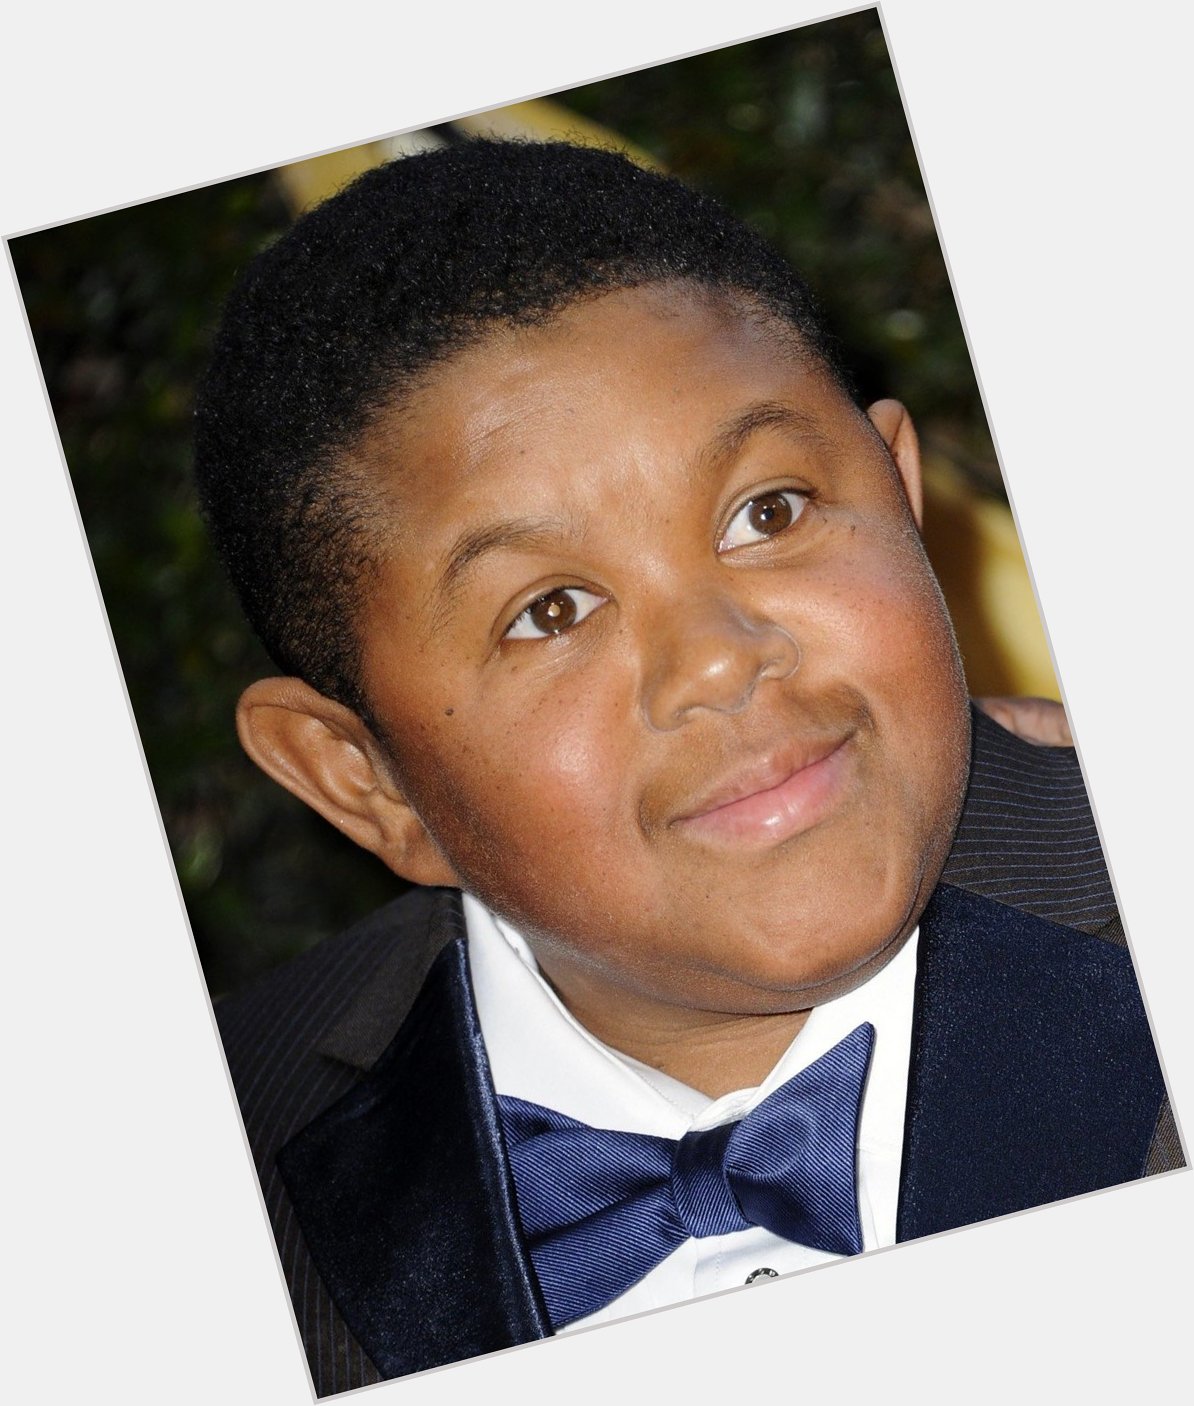 We here at ProClassic Tv would like to wish Emmanuel Lewis a very Happy Birthday! 